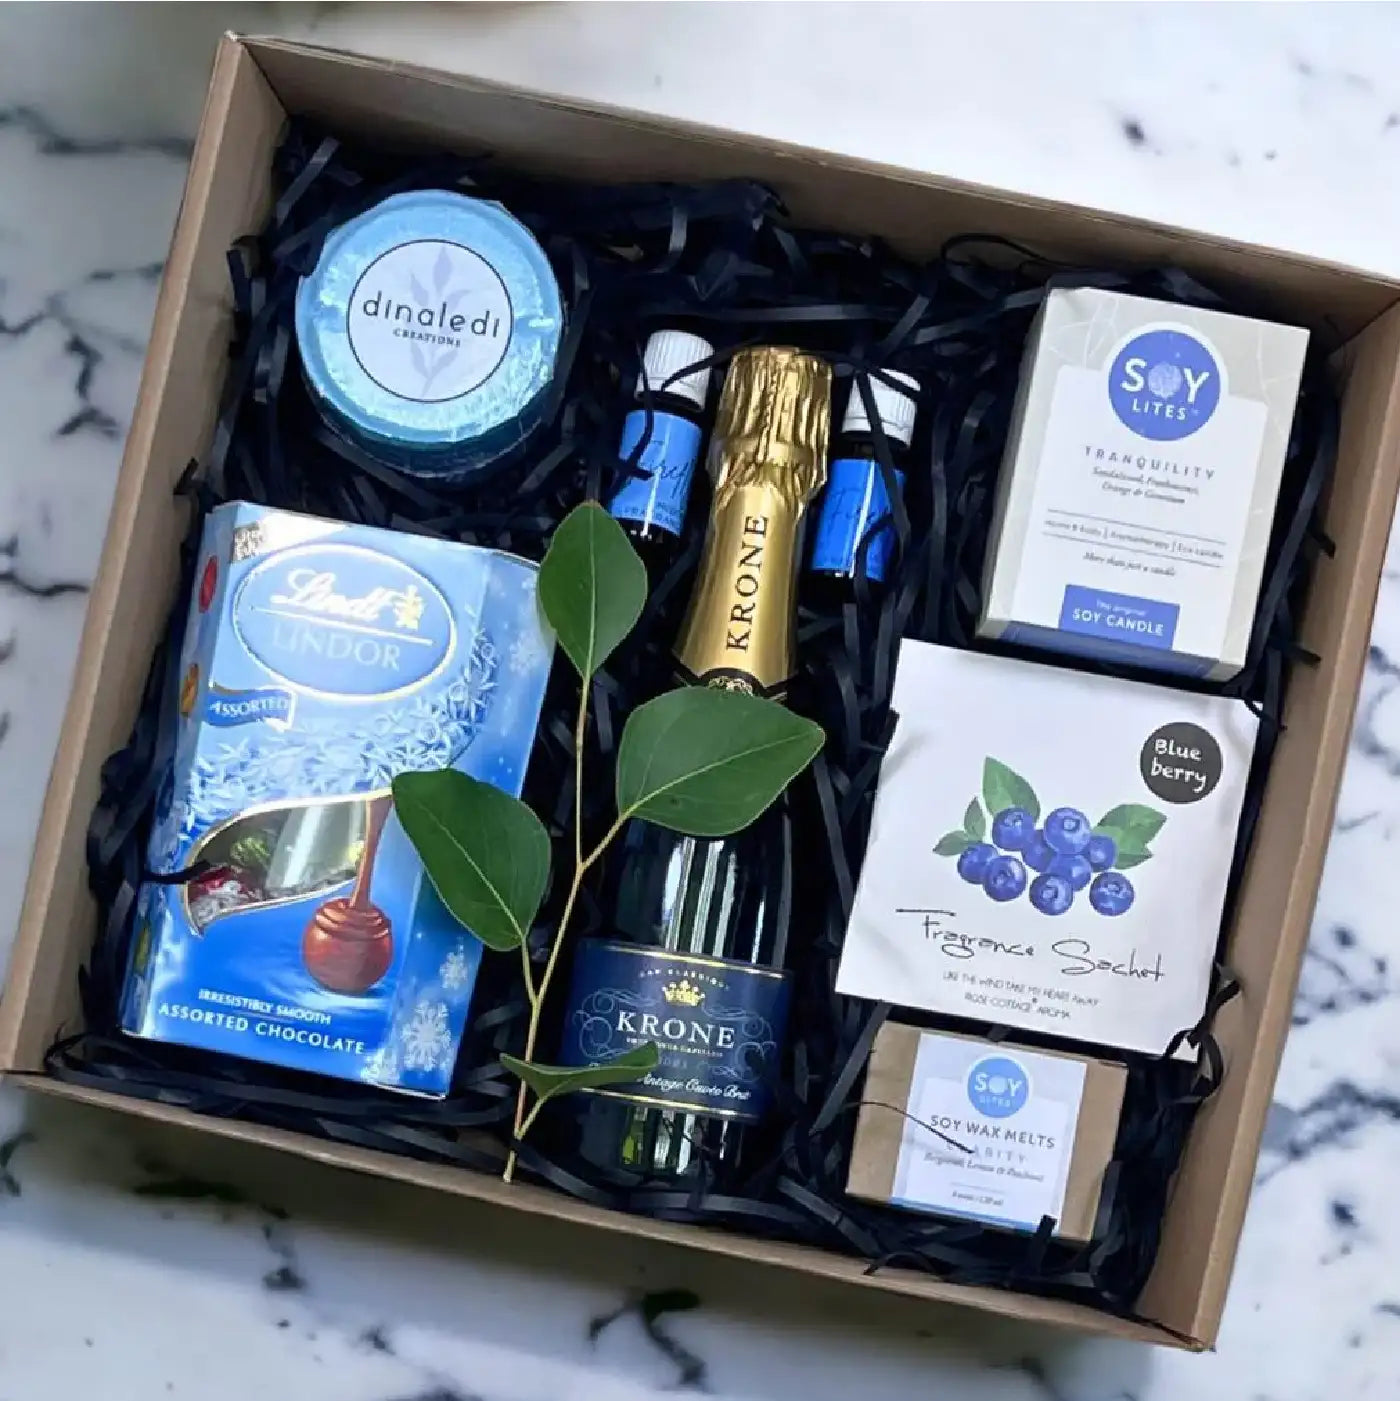 Elegant gift box featuring Lindt Lindor chocolates, Krone sparkling wine, soy candles, fragrance sachets, and wax melts, neatly arranged with a sprig of greenery on a marble background. Perfect for business gifting. Fabulous Flowers and Gifts.